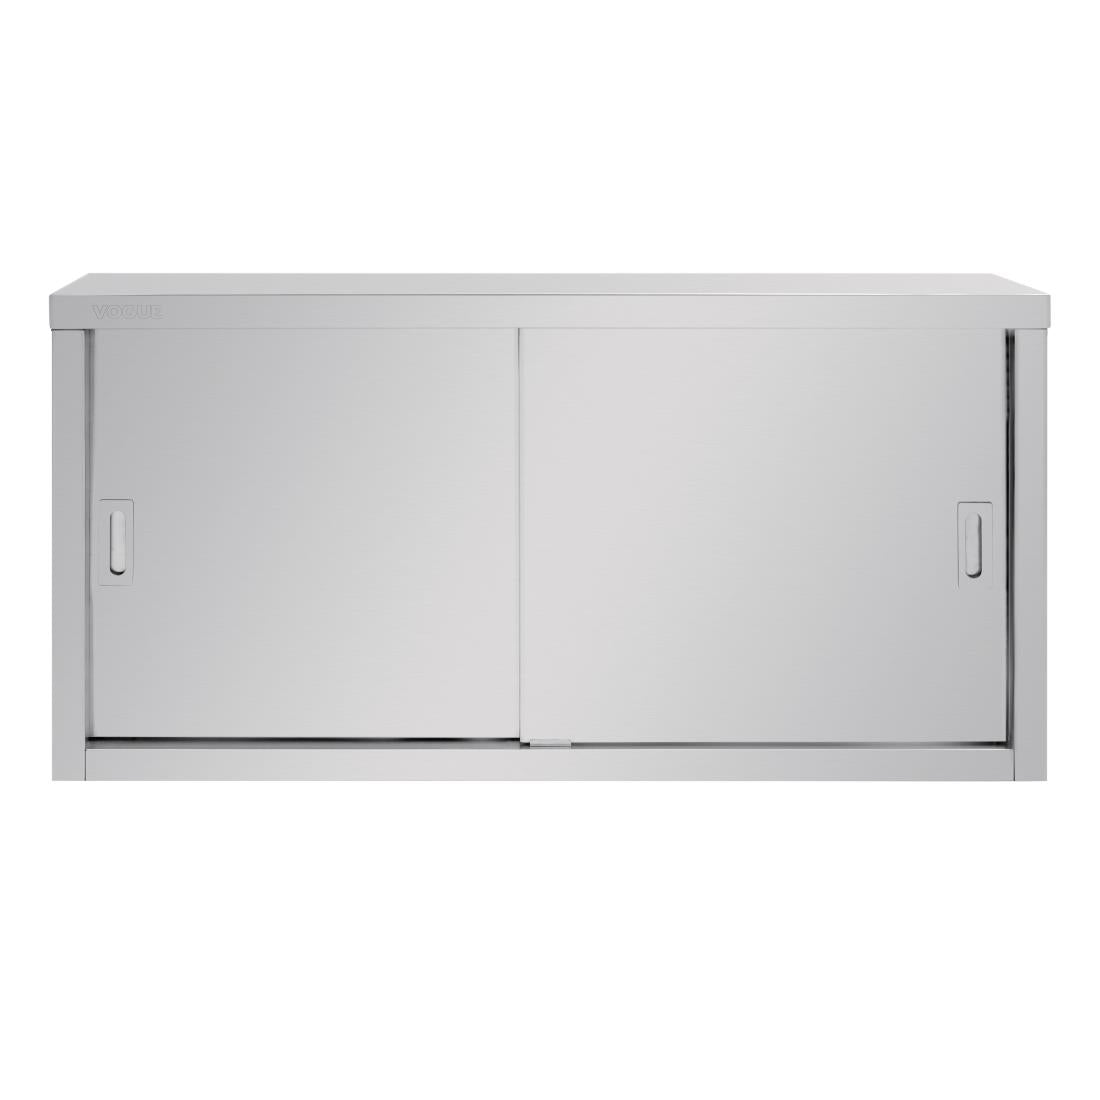 DL450 Vogue Stainless Steel Wall Cupboard 1200mm JD Catering Equipment Solutions Ltd